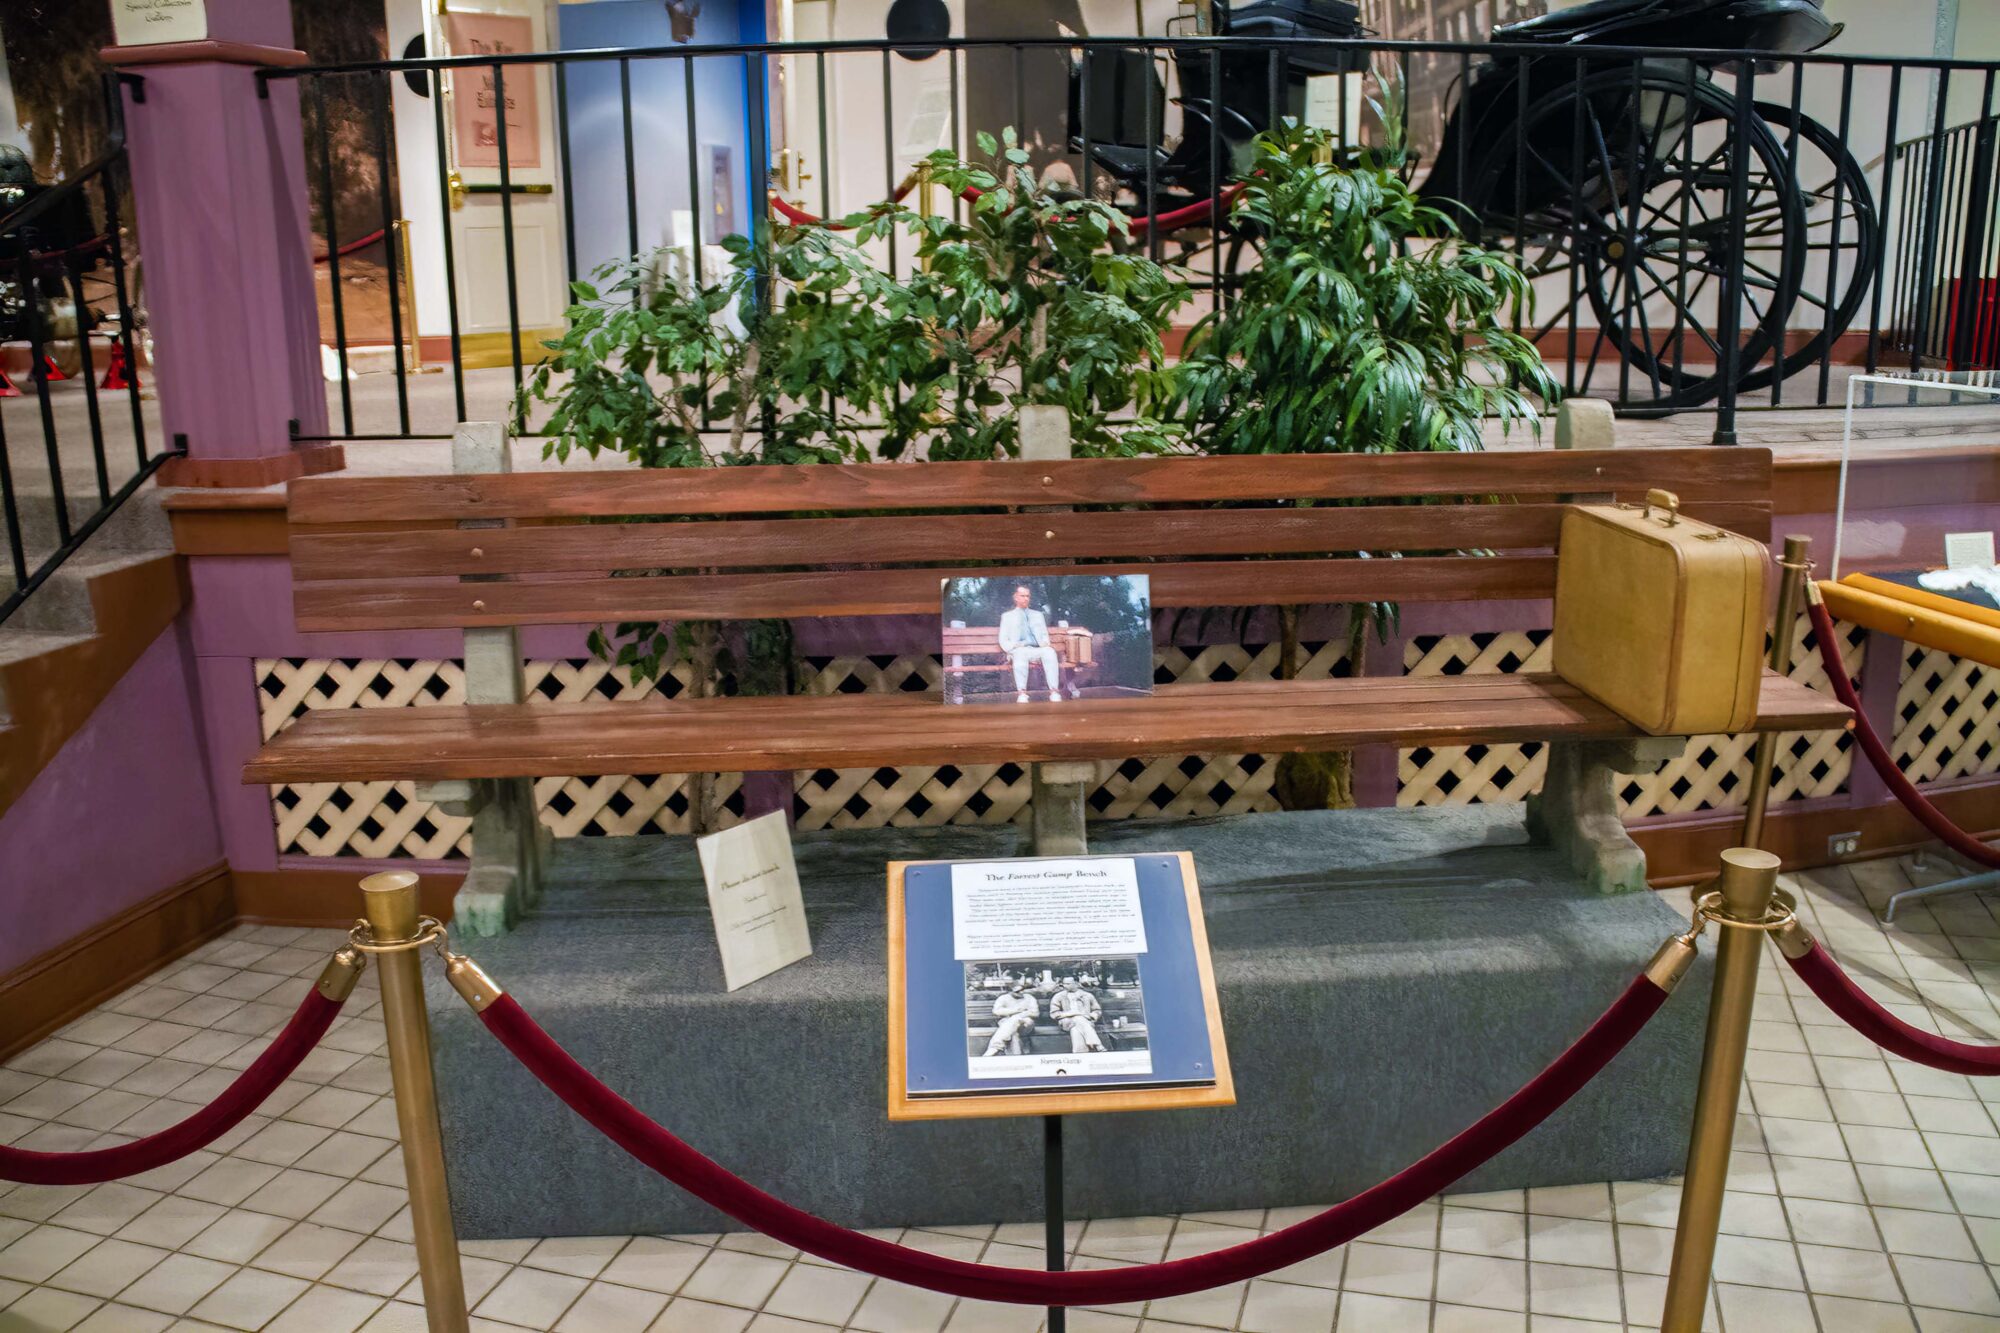 Forrest Gump bench from the movies is where?